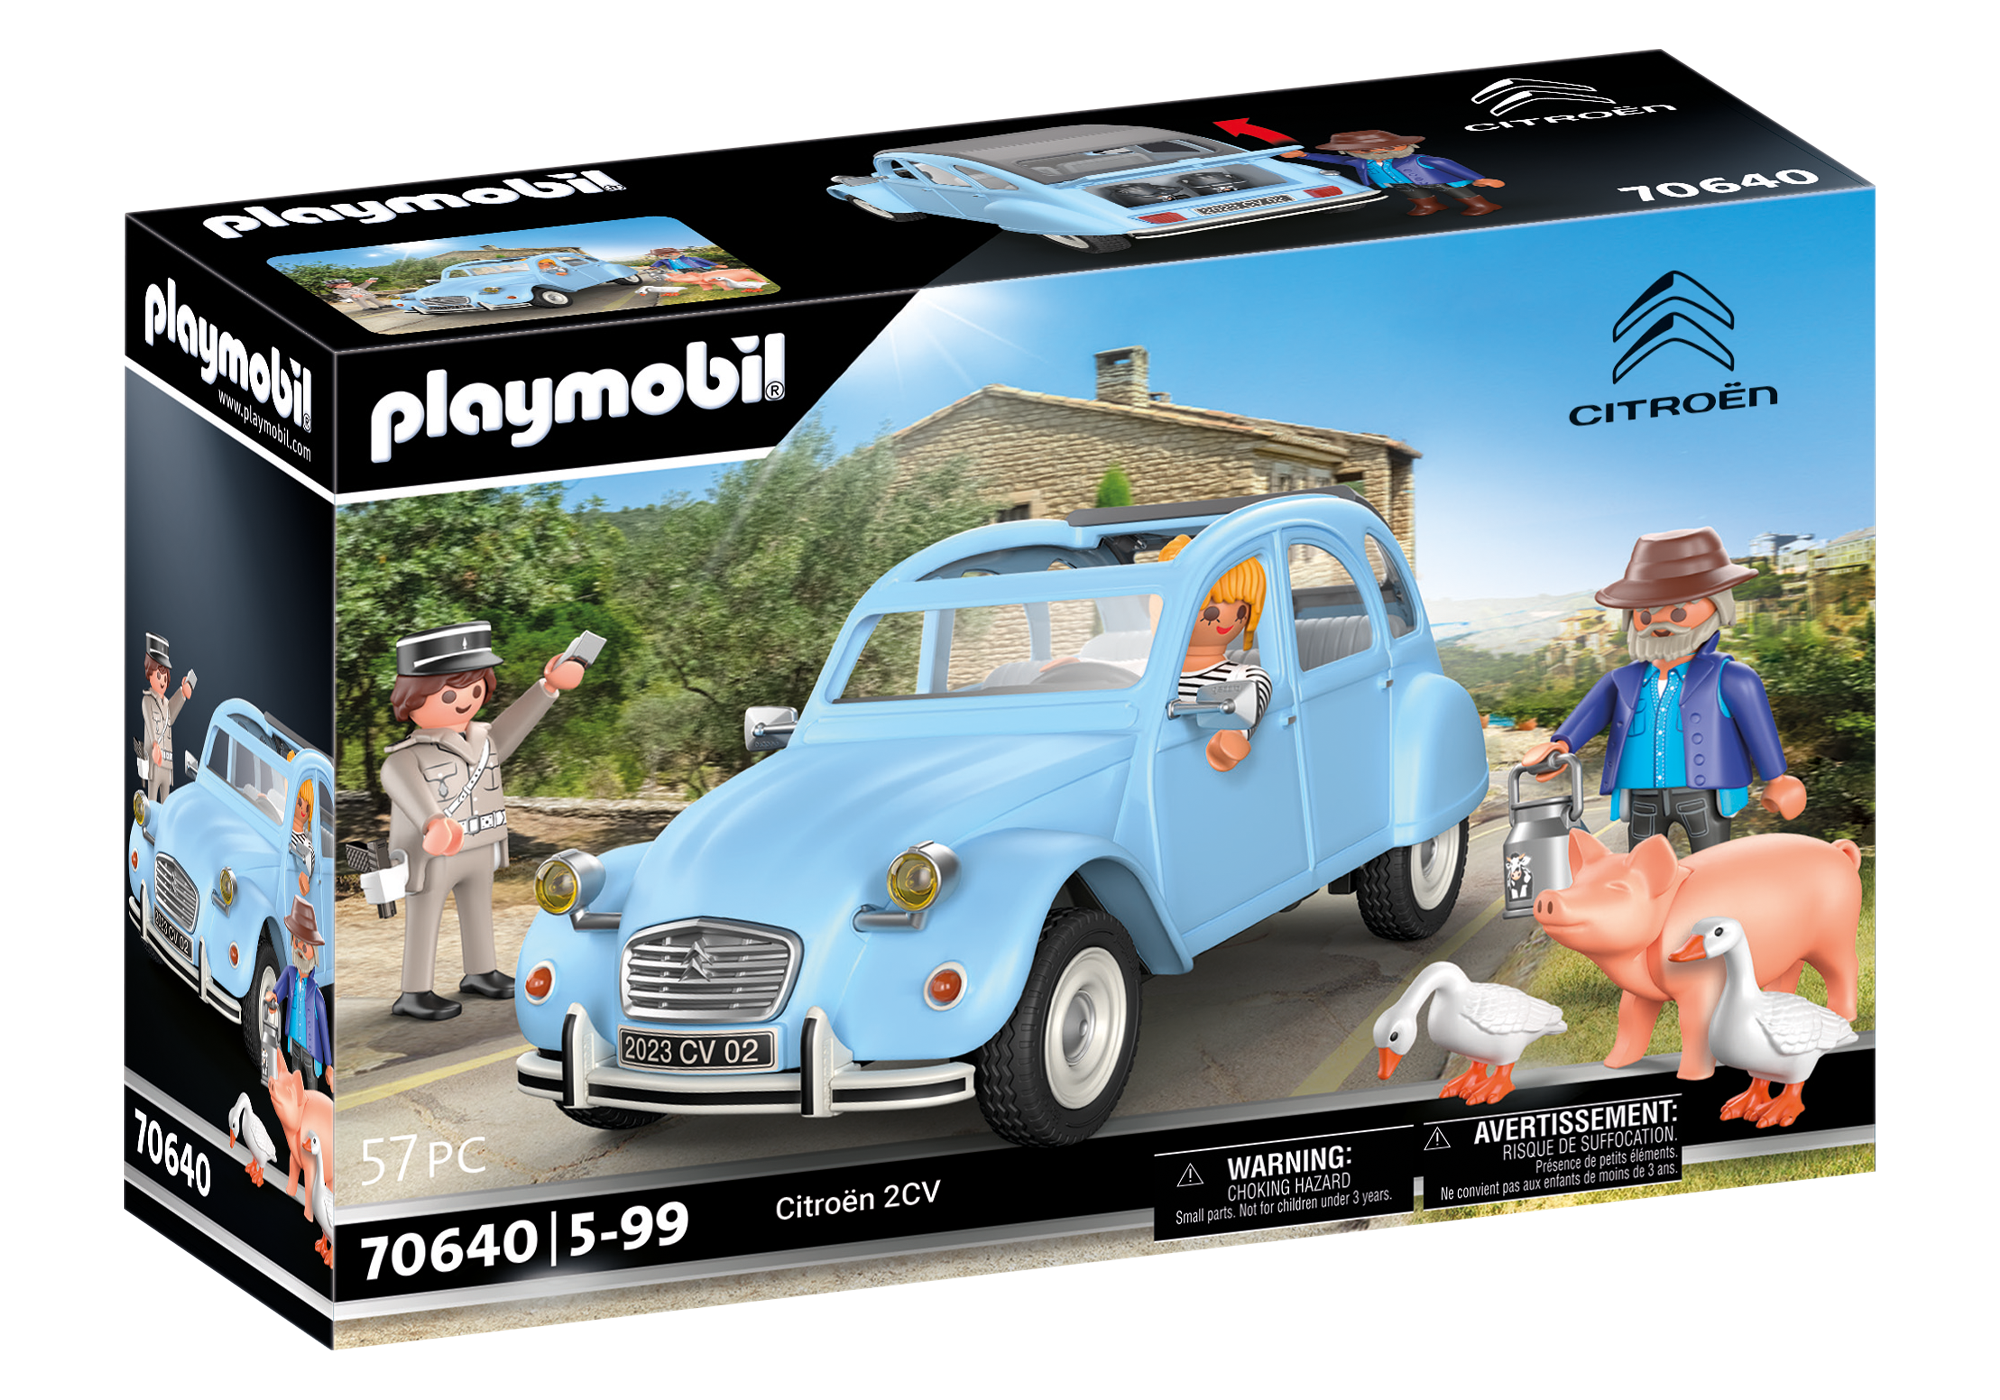 Citroen 2CV: The cult-classic French car goes PLAYMOBIL - Mike